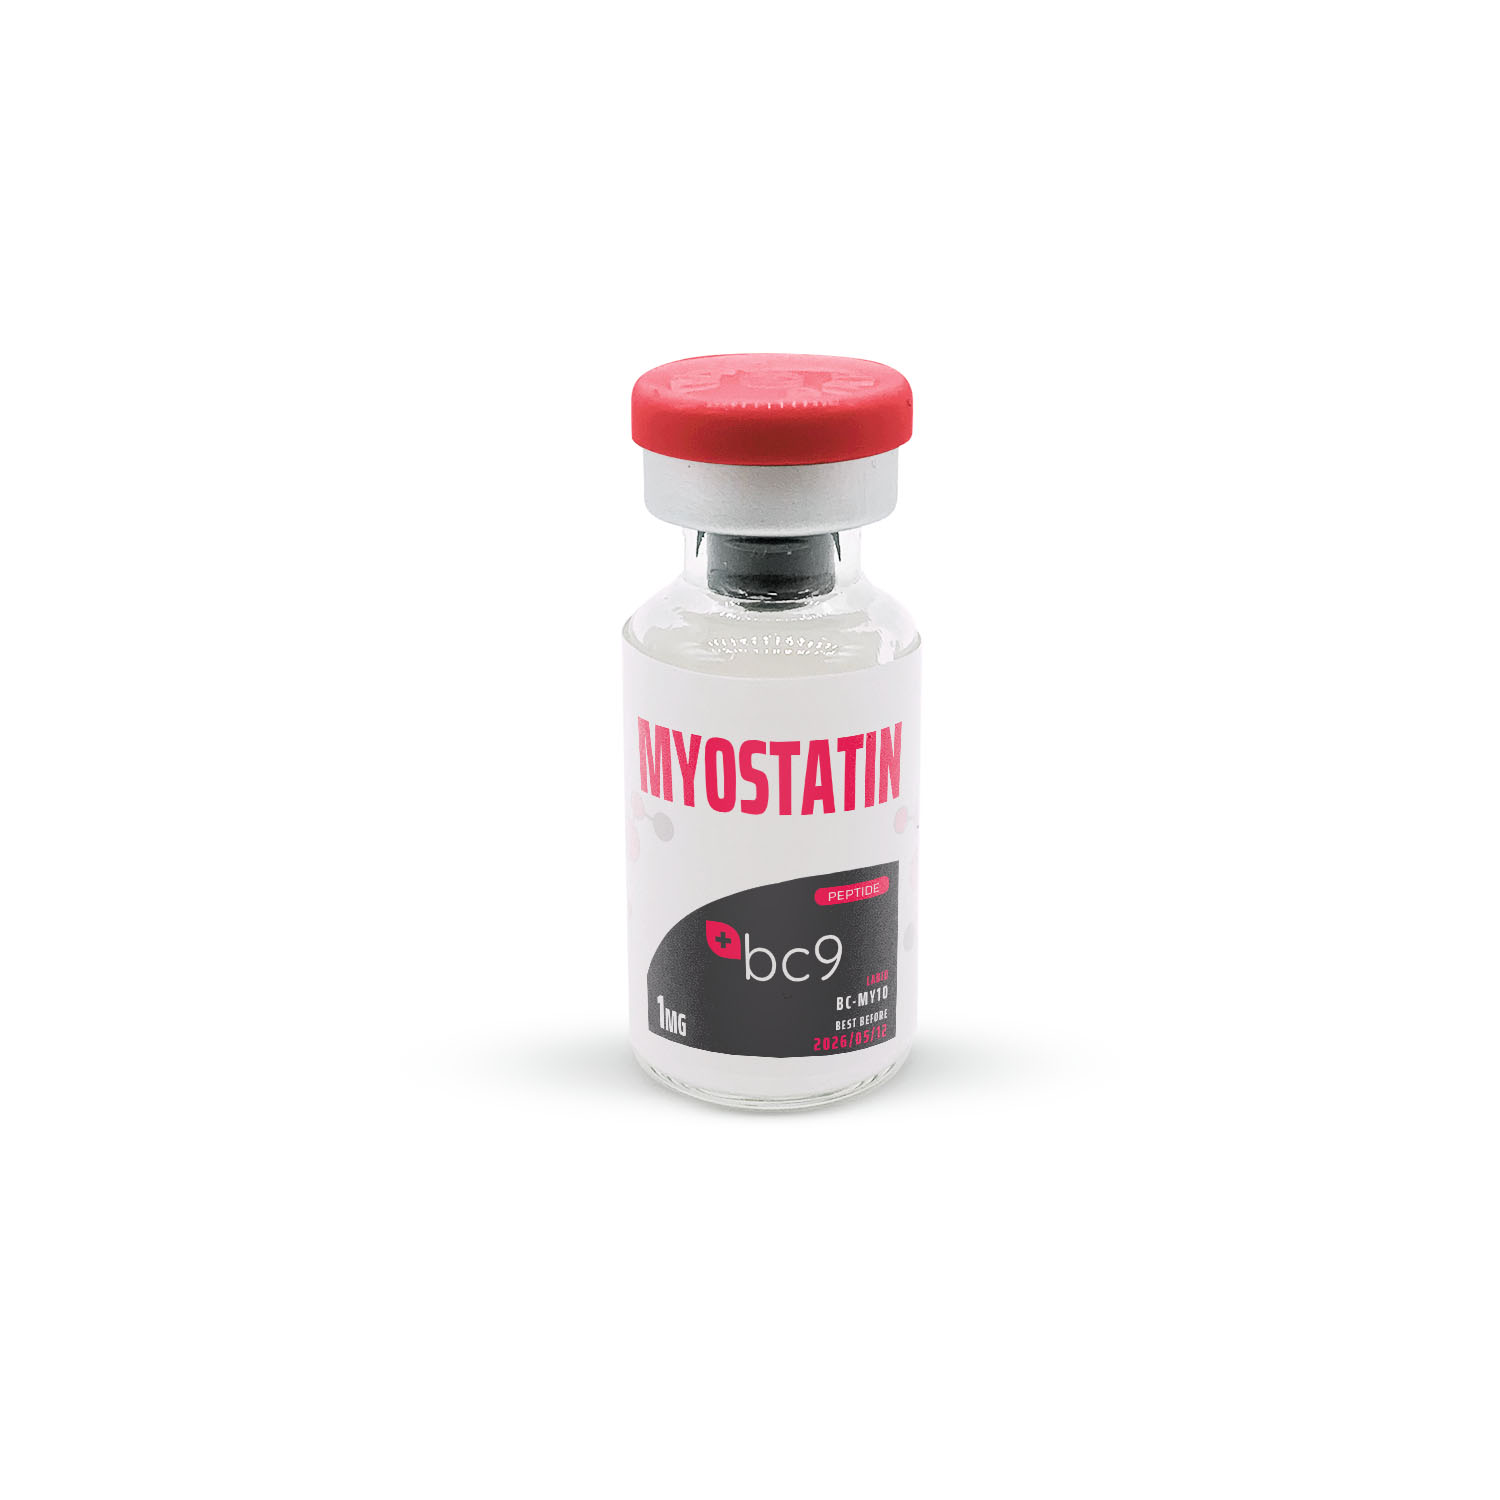 Myostatin Peptide for Sale | Fast Shipping | BC9.org